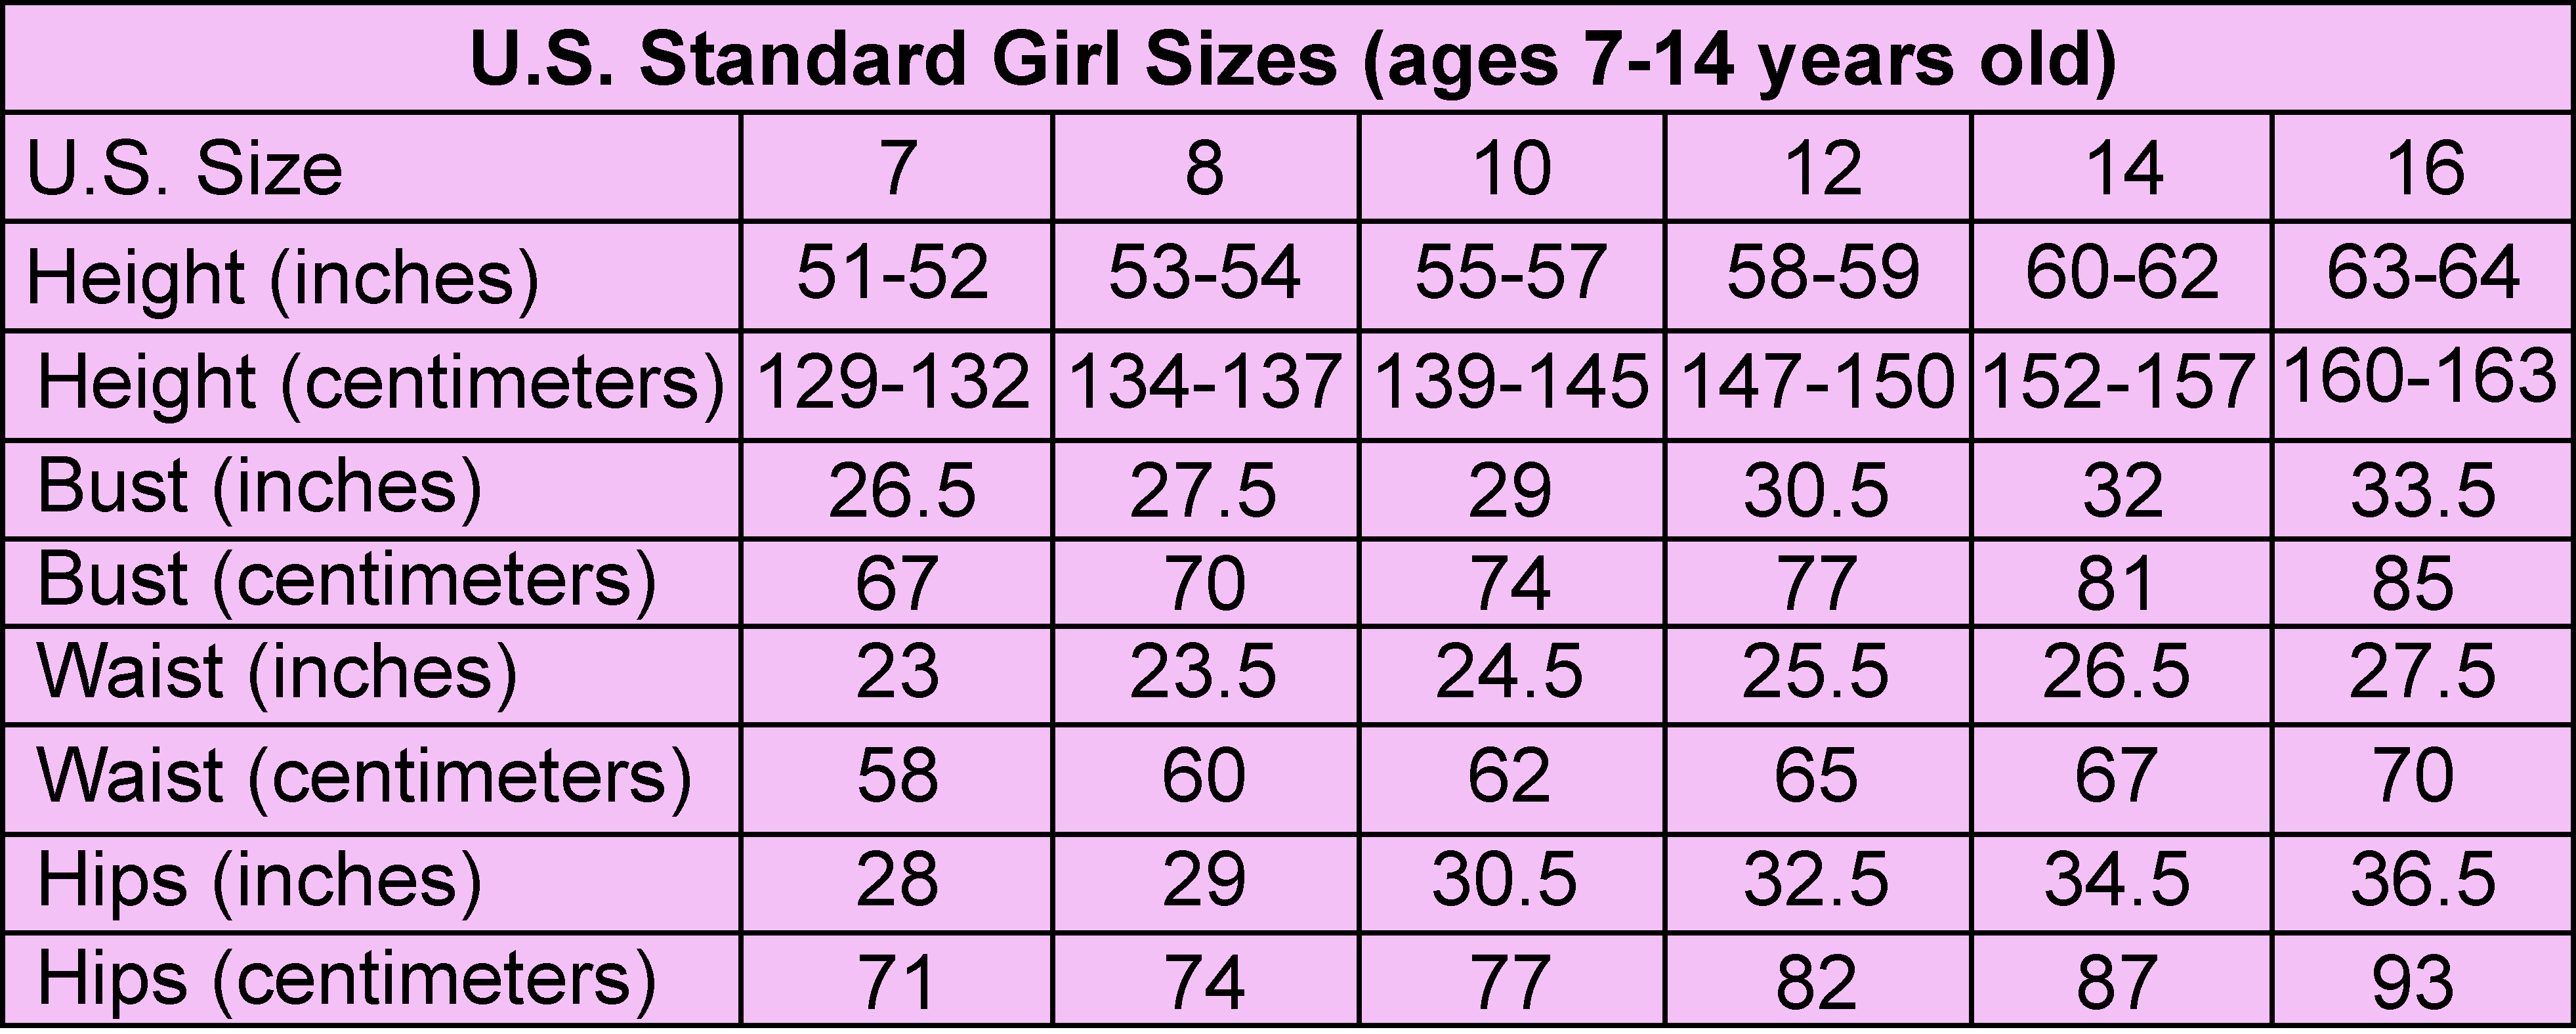 shoe size 10 yr old girl